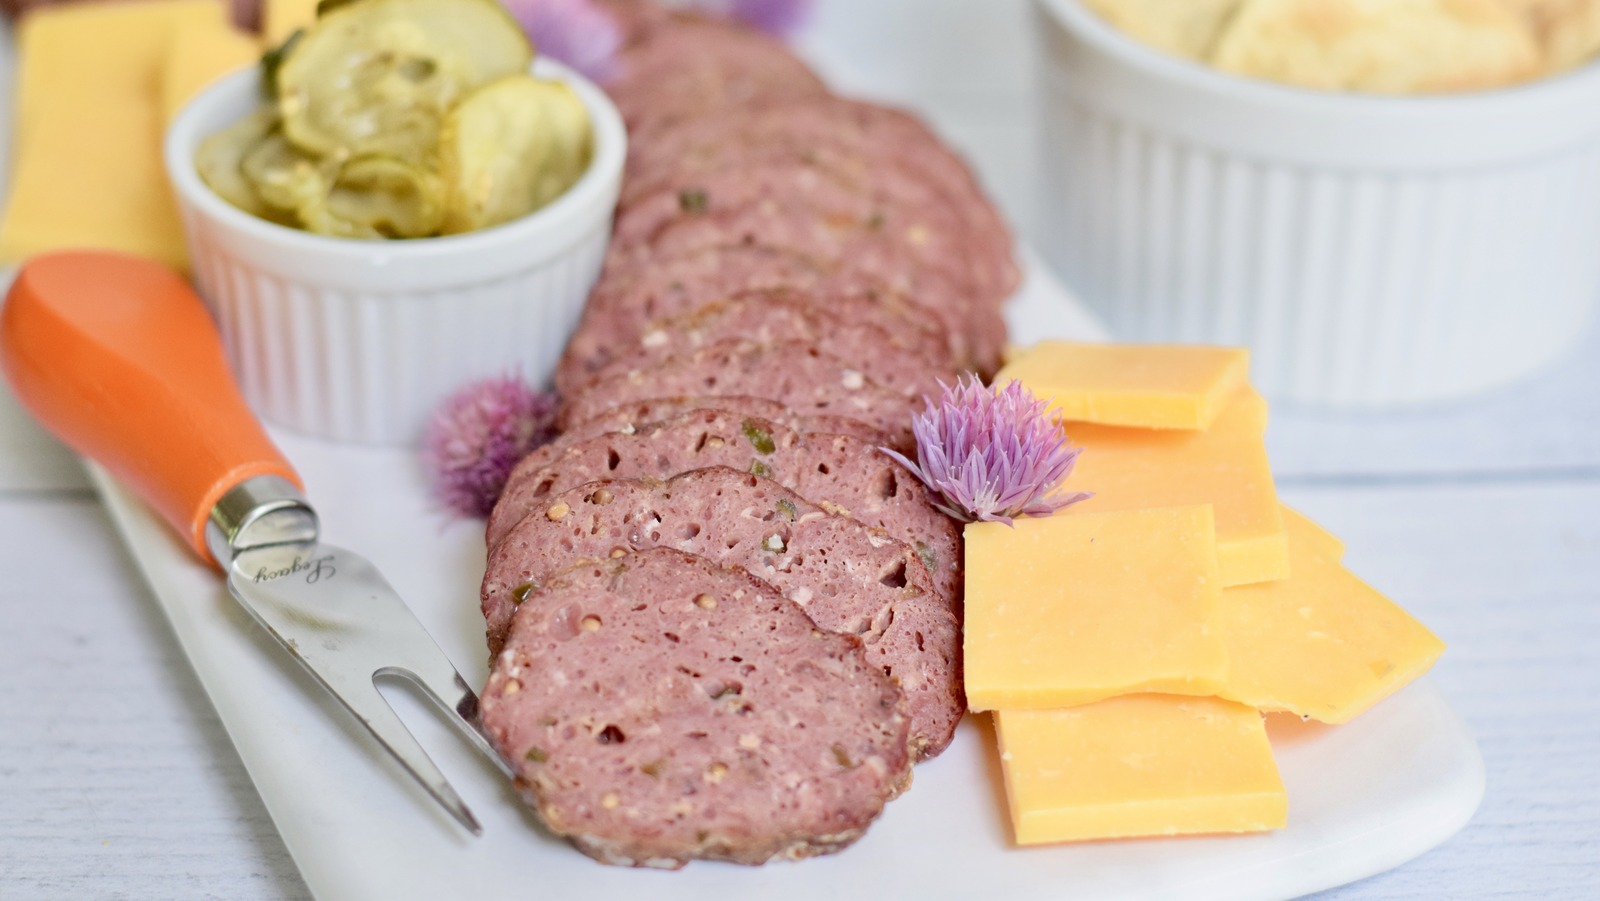 Simple Homemade Venison Summer Sausage Recipe - Mashed